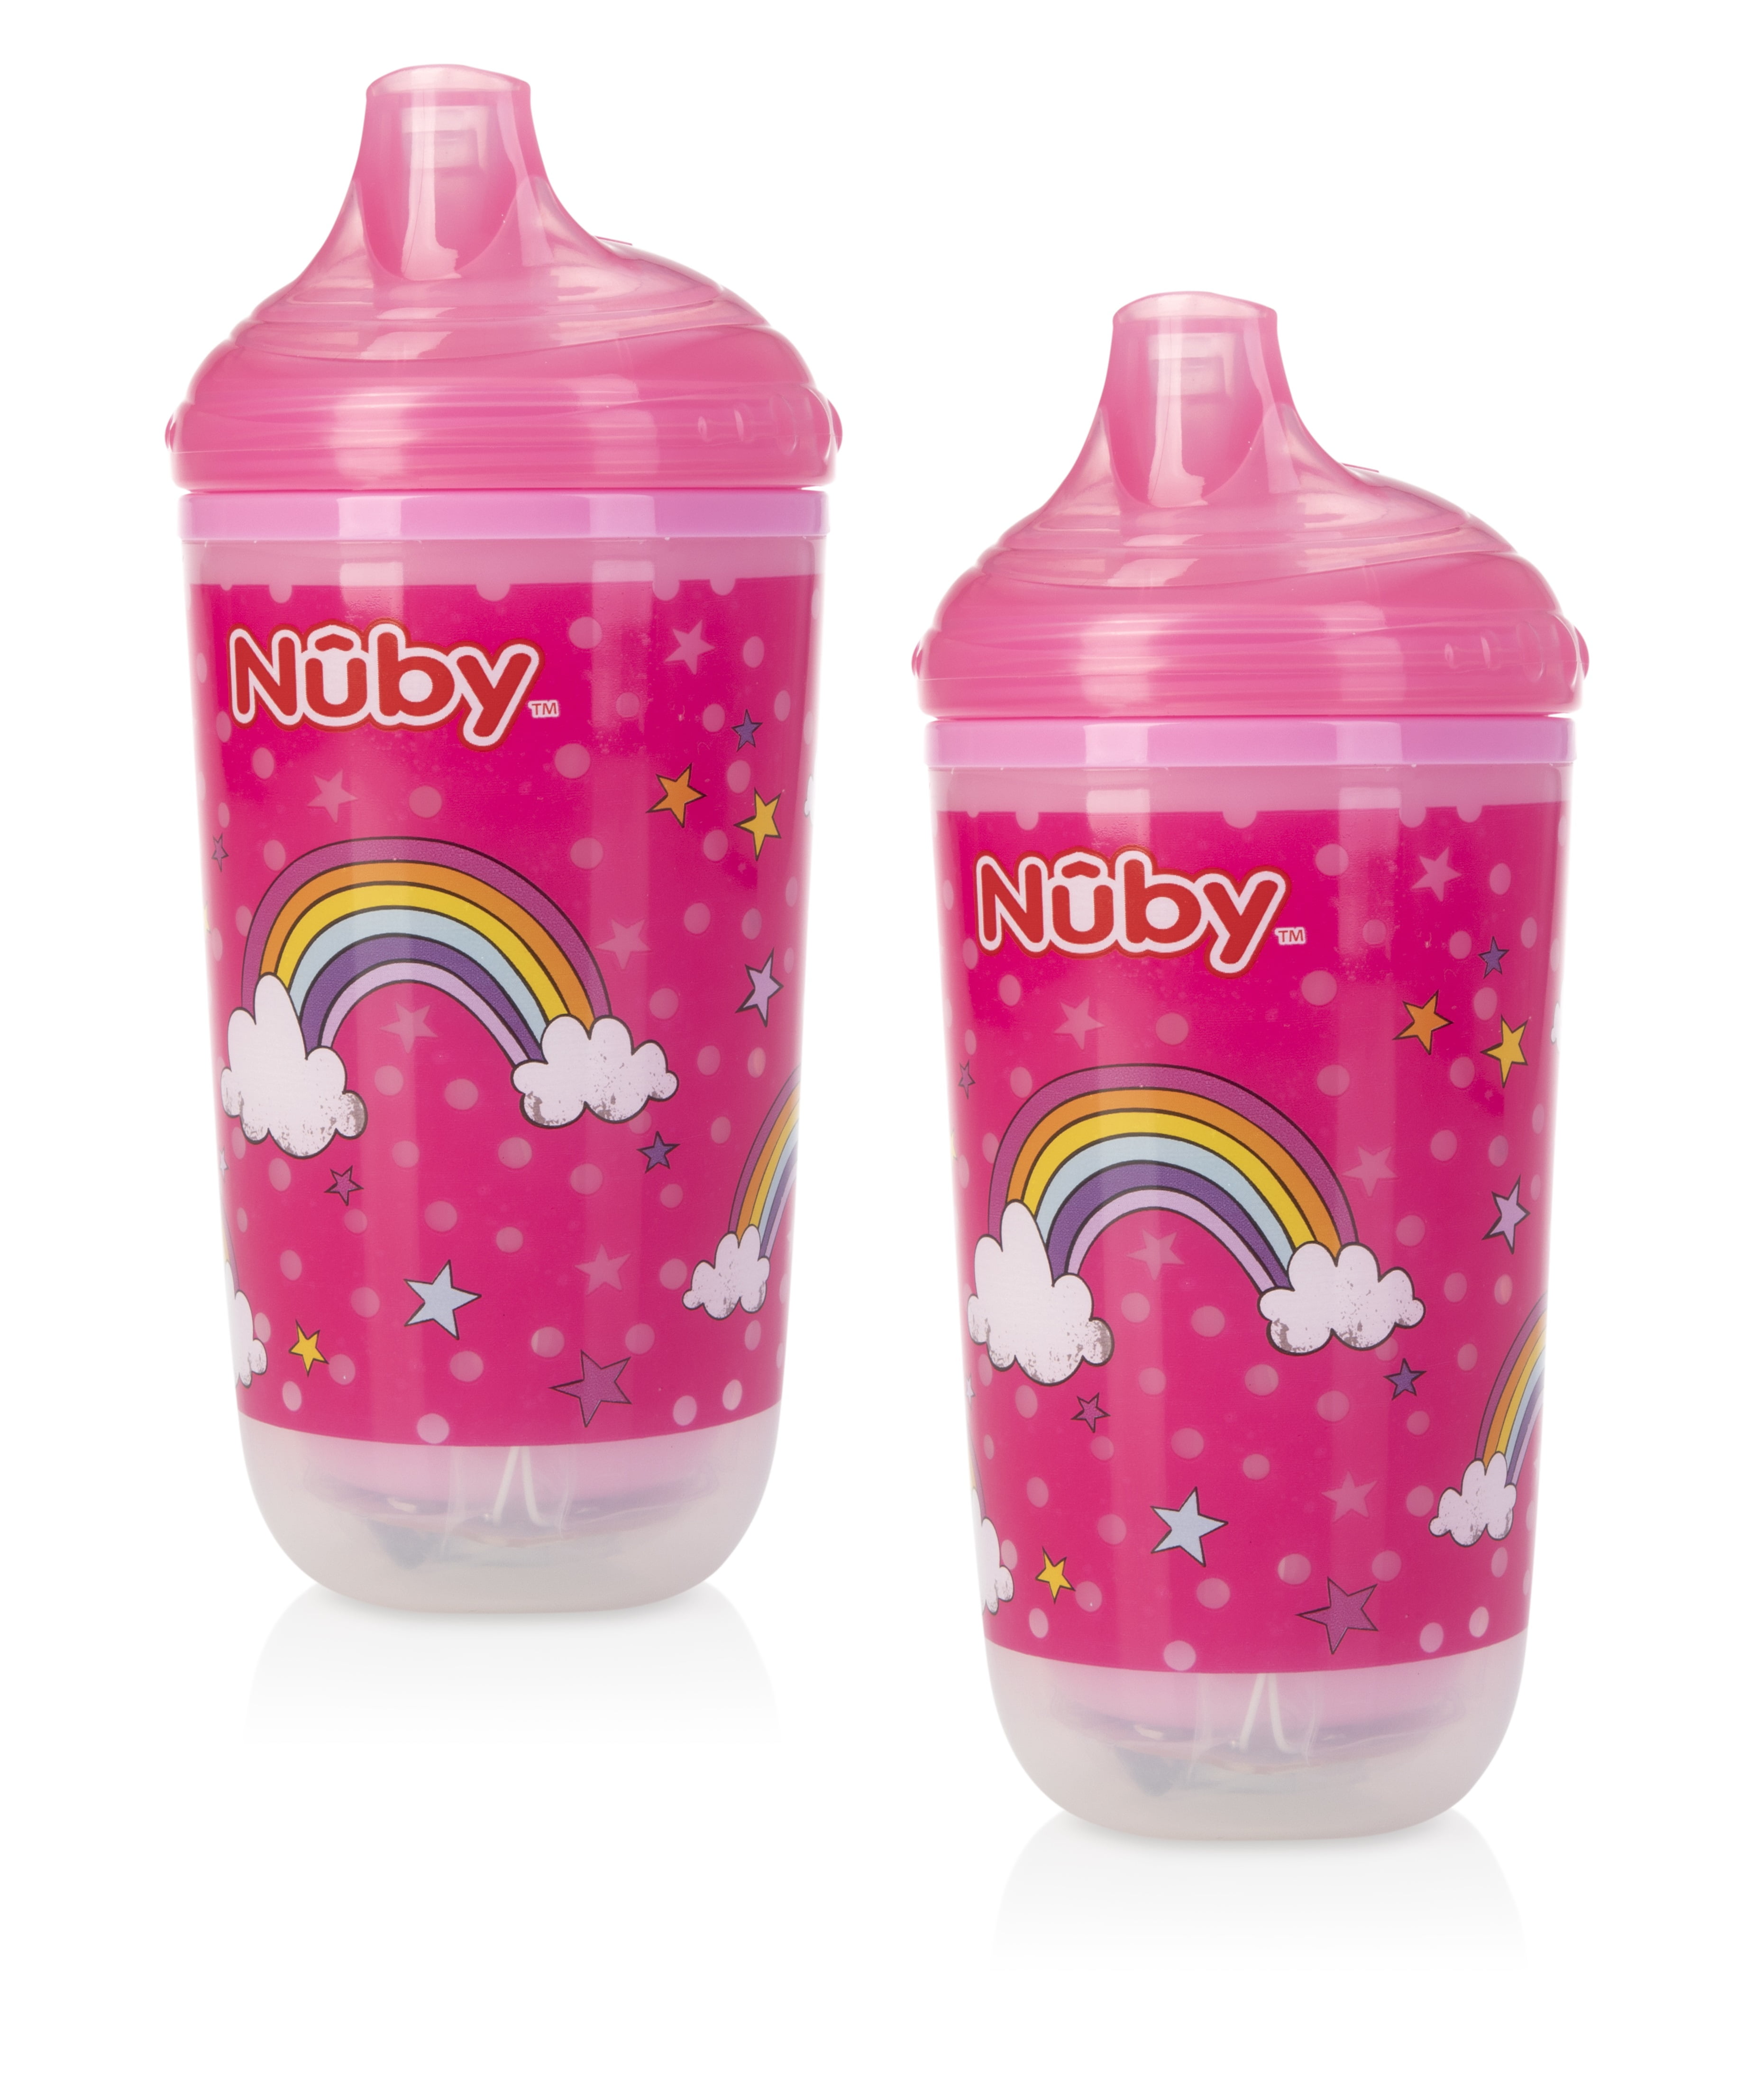 Re-Play Sippy Cups for Toddlers, 2pk 10oz No Spill Sippy Cup, Aqua Mint